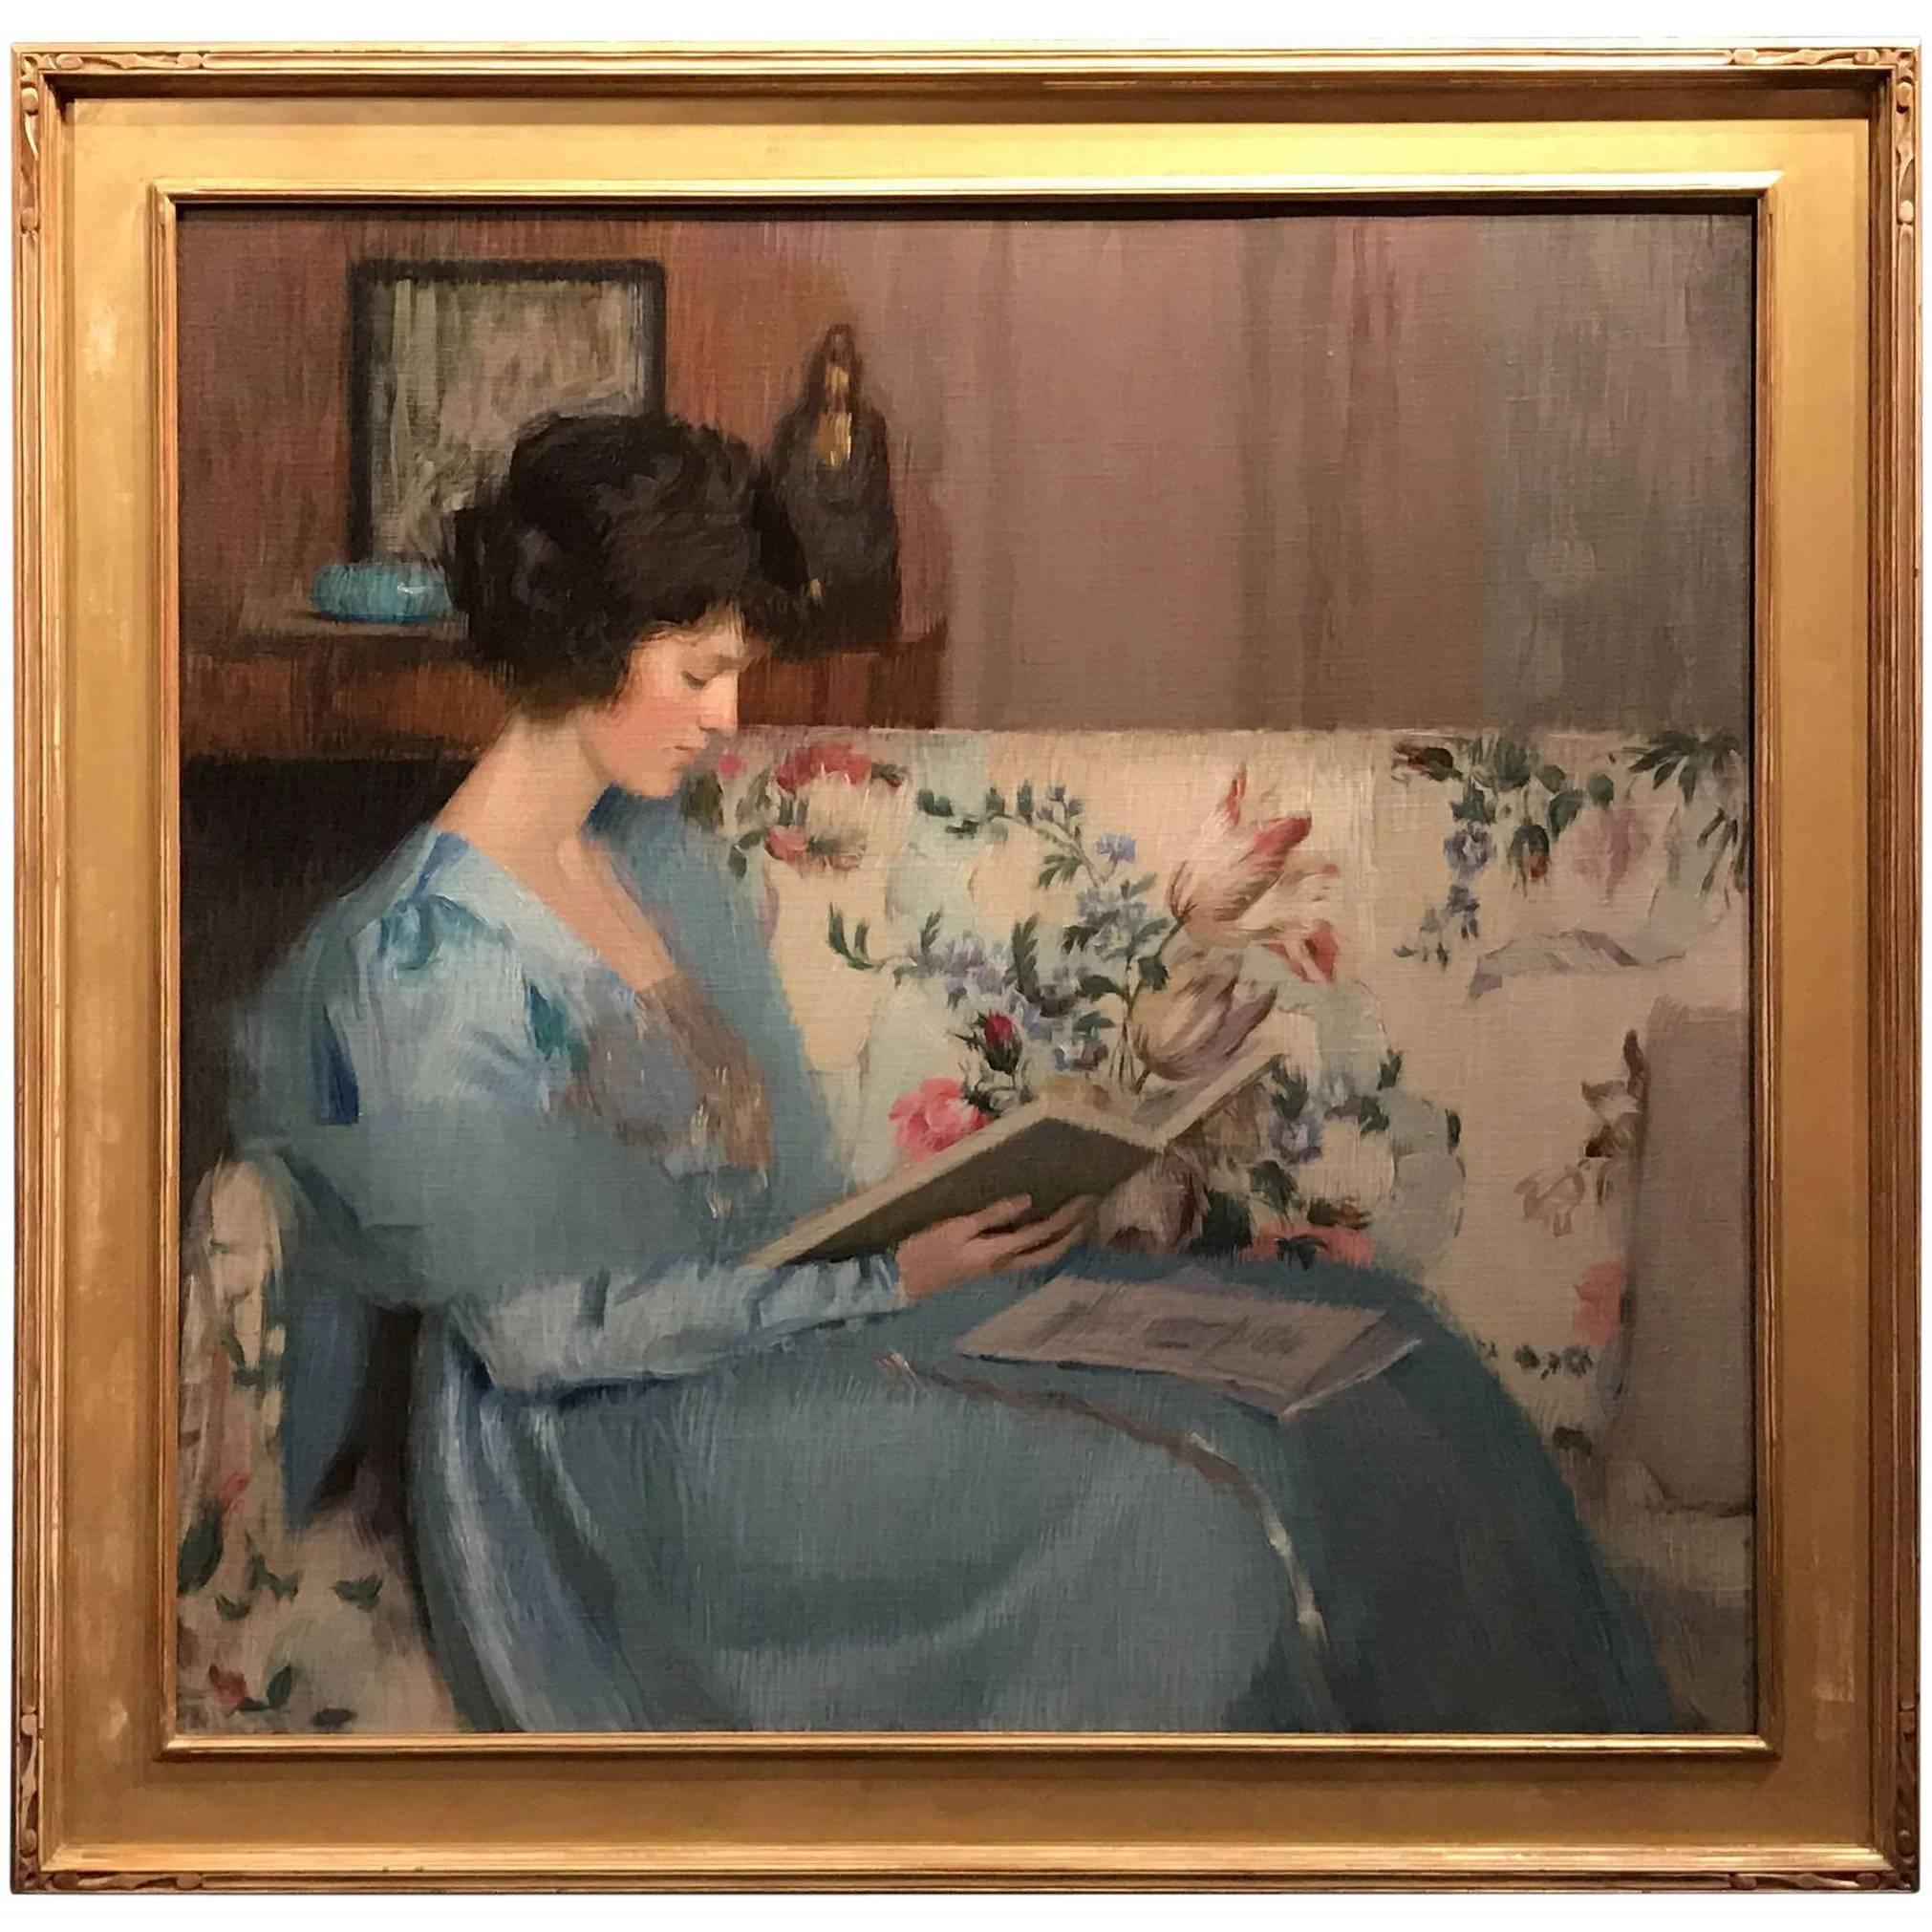 Louise Williams Jackson Portrait Painting - Portrait of a Woman Reading a Book on a Sofa